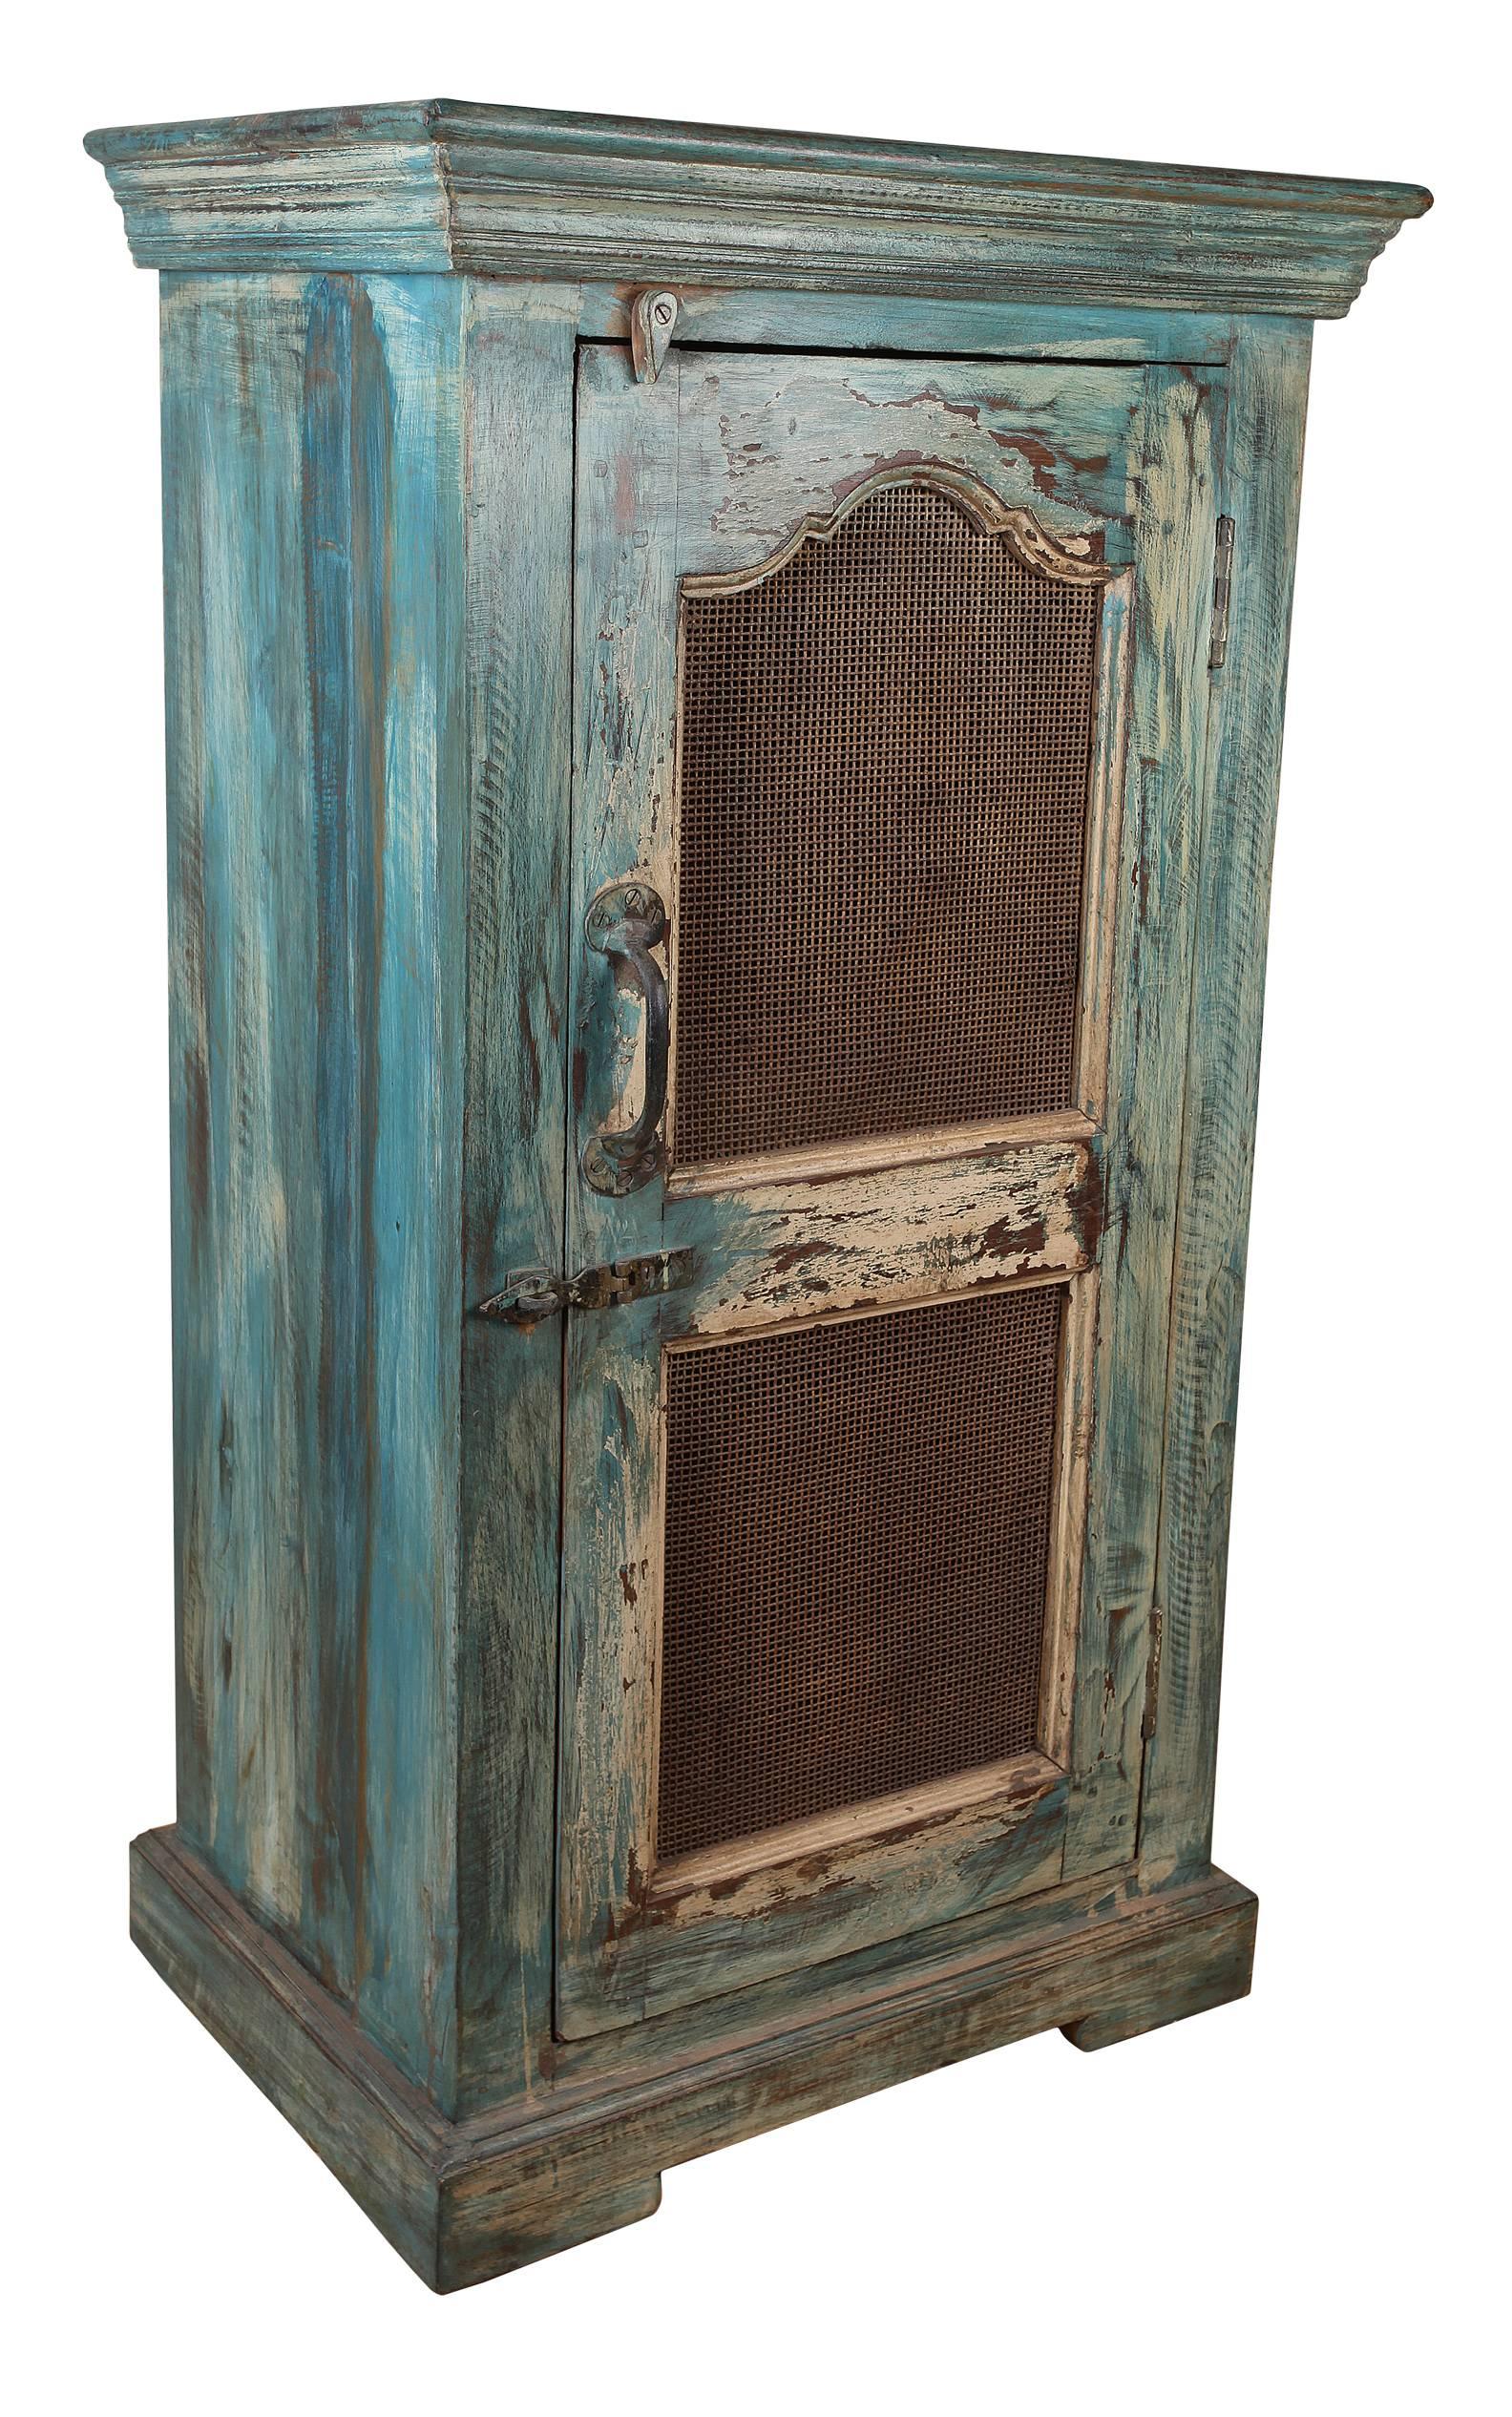 Pair of late 19th century screened window panels with original paint, converted to side cabinets using reclaimed architectural elements. Interior shelf. Great as bedsides or end tables. Left and right openings. Just the body dimensions without the